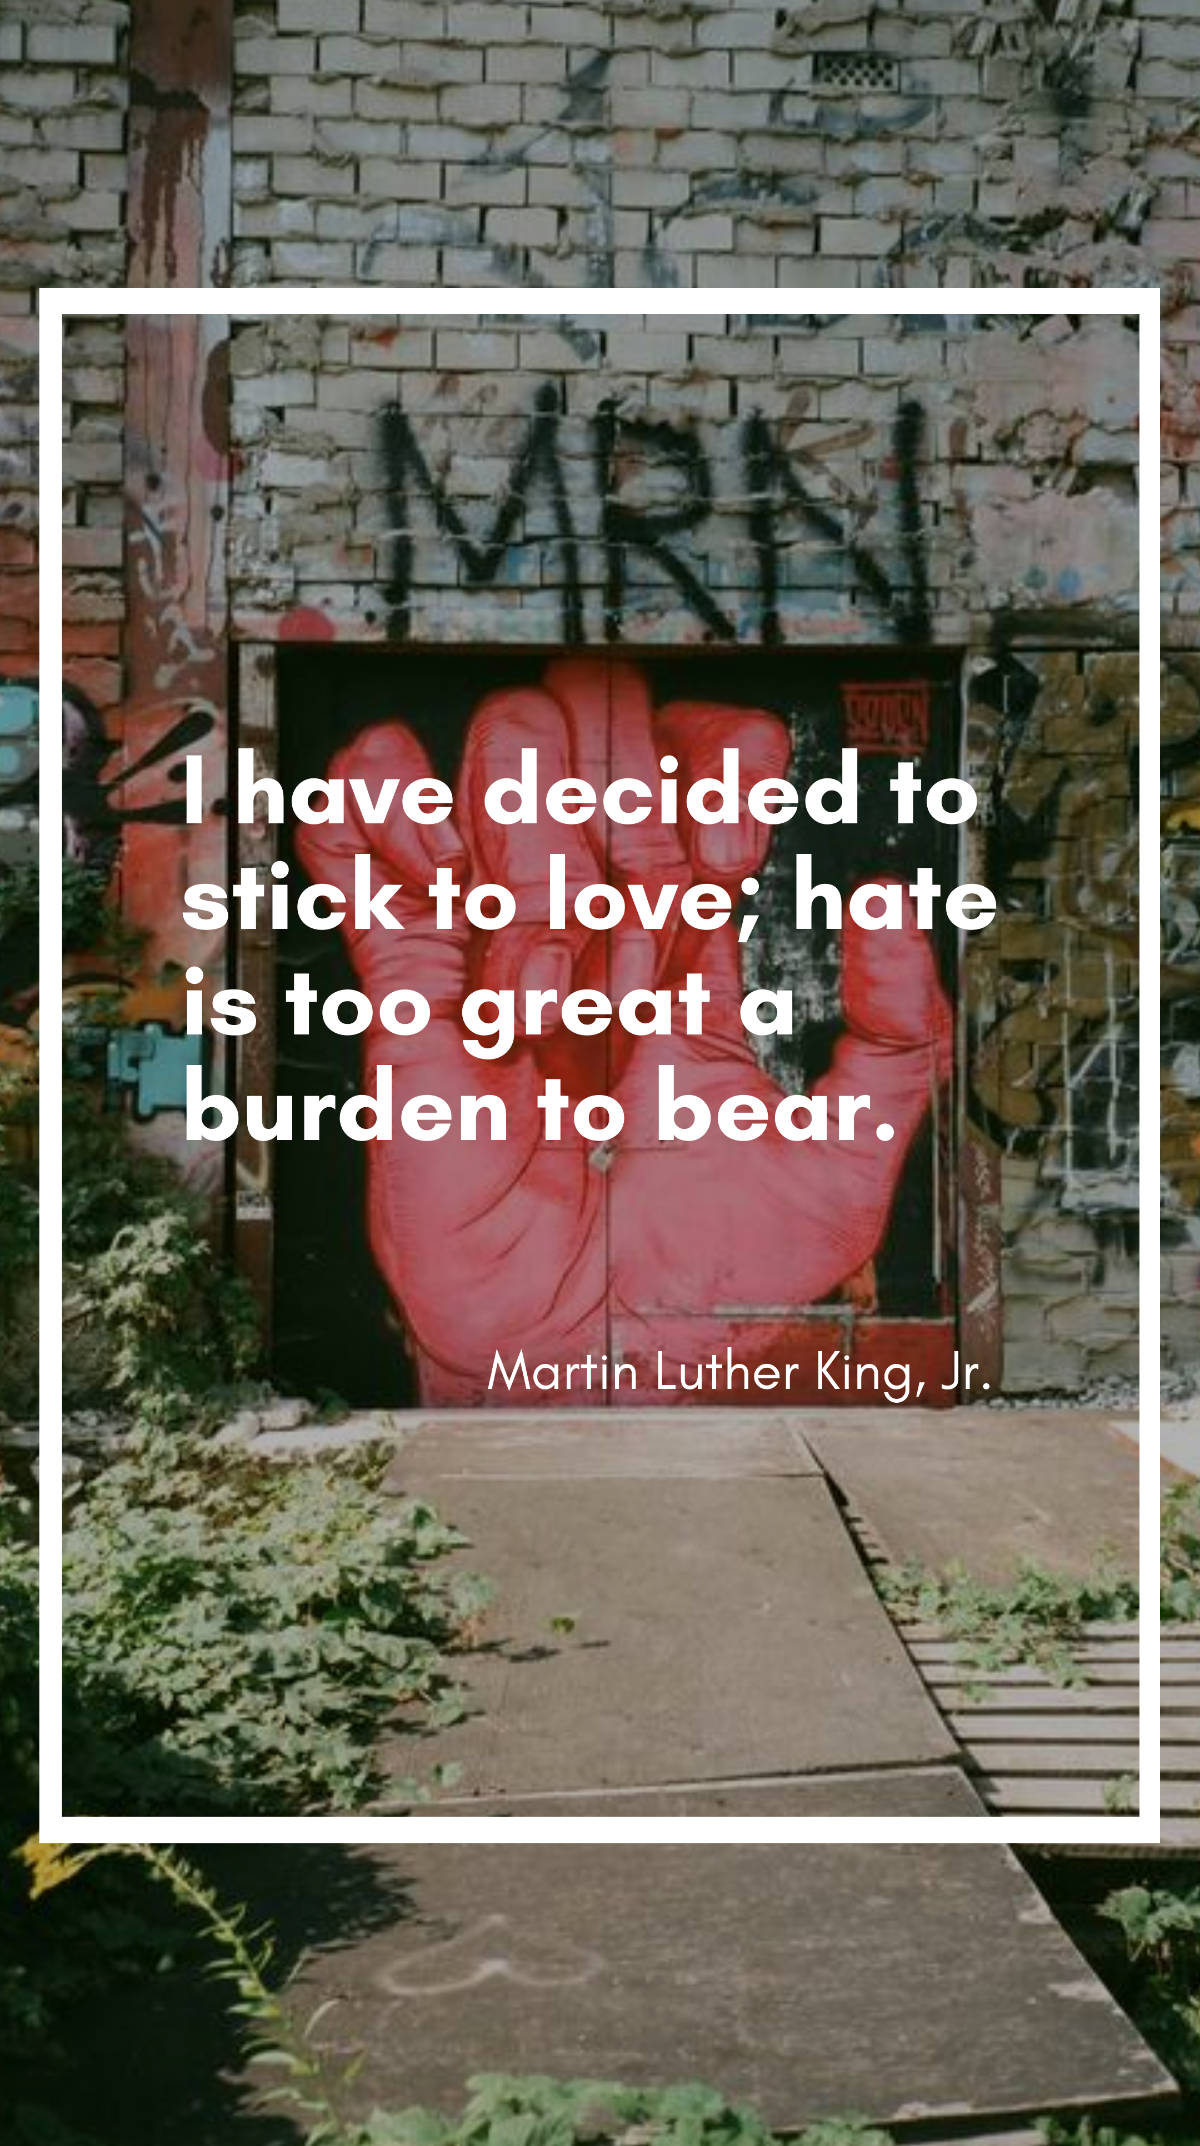 Martin Luther King, Jr. - “I have decided to stick to love; hate is too great a burden to bear.” Template